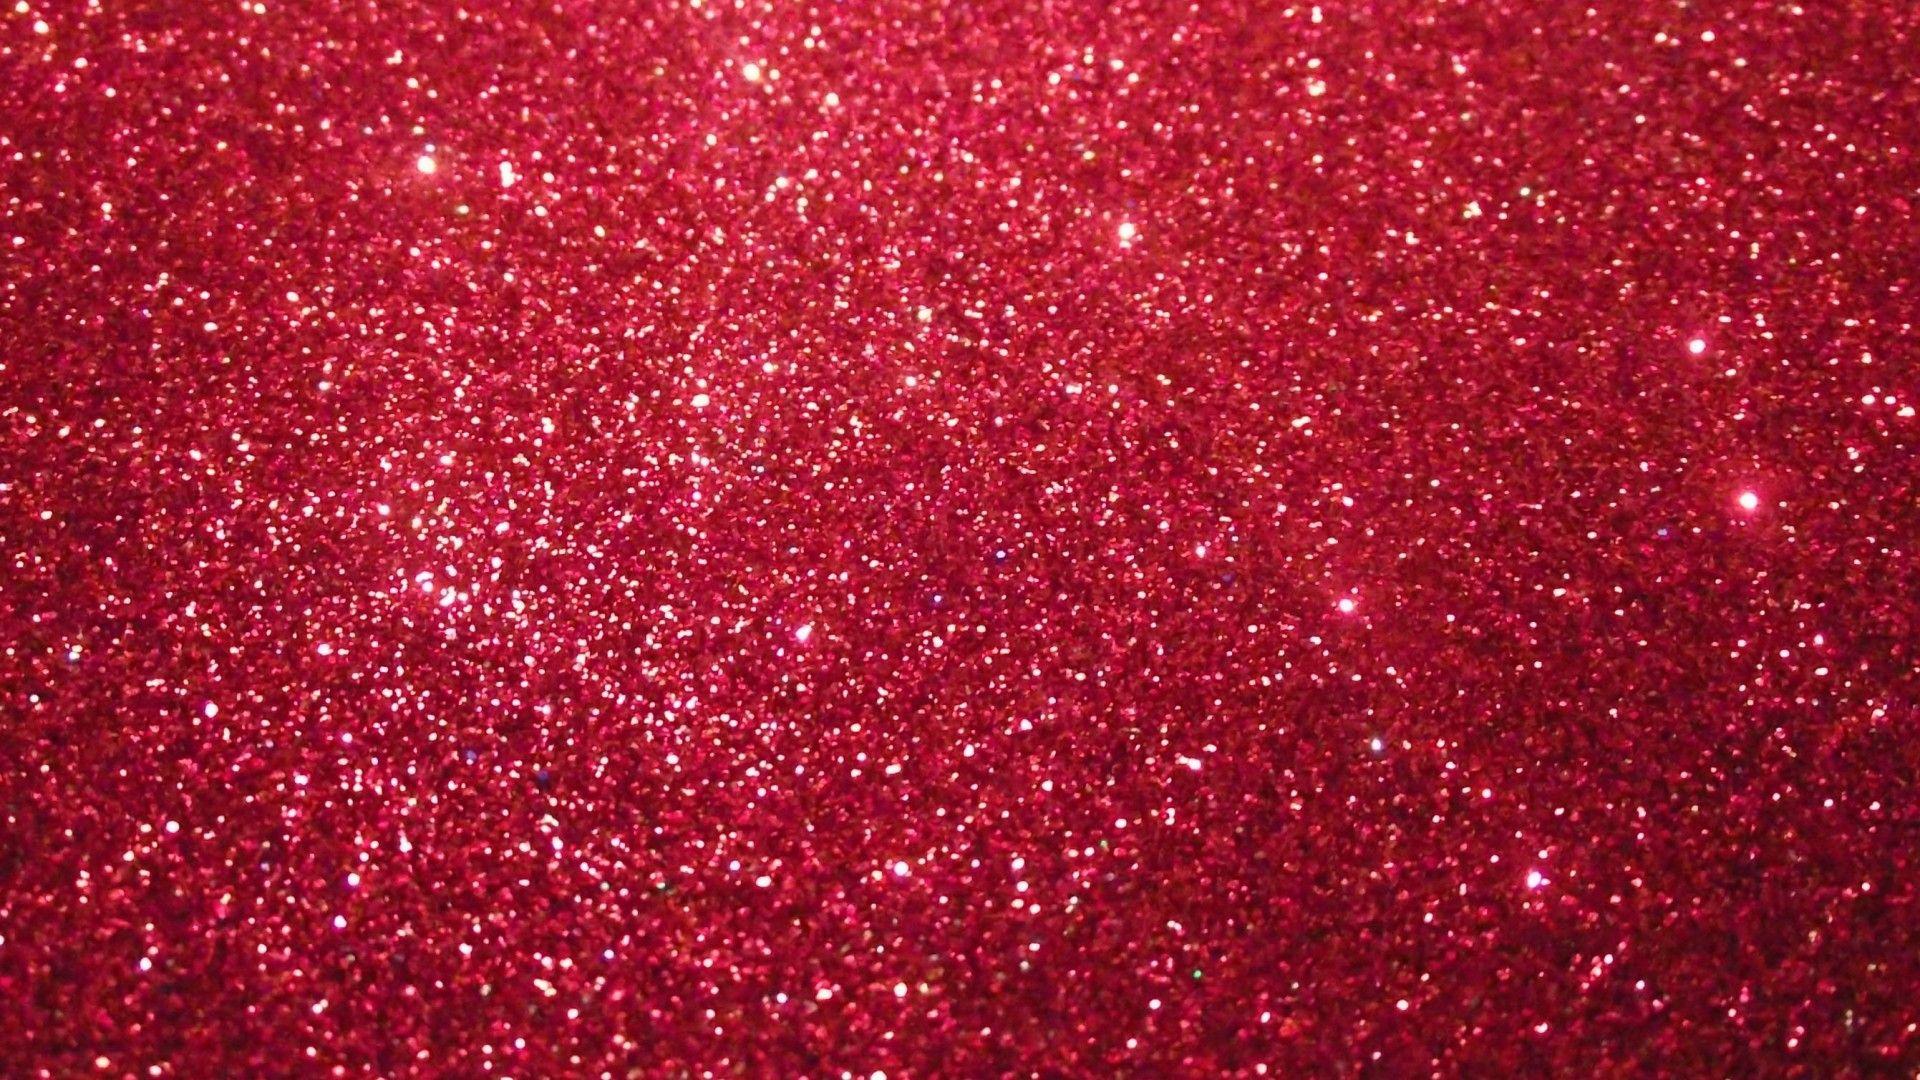 Wallpaper.wiki Image Pink Glitter Background PIC WPE001884